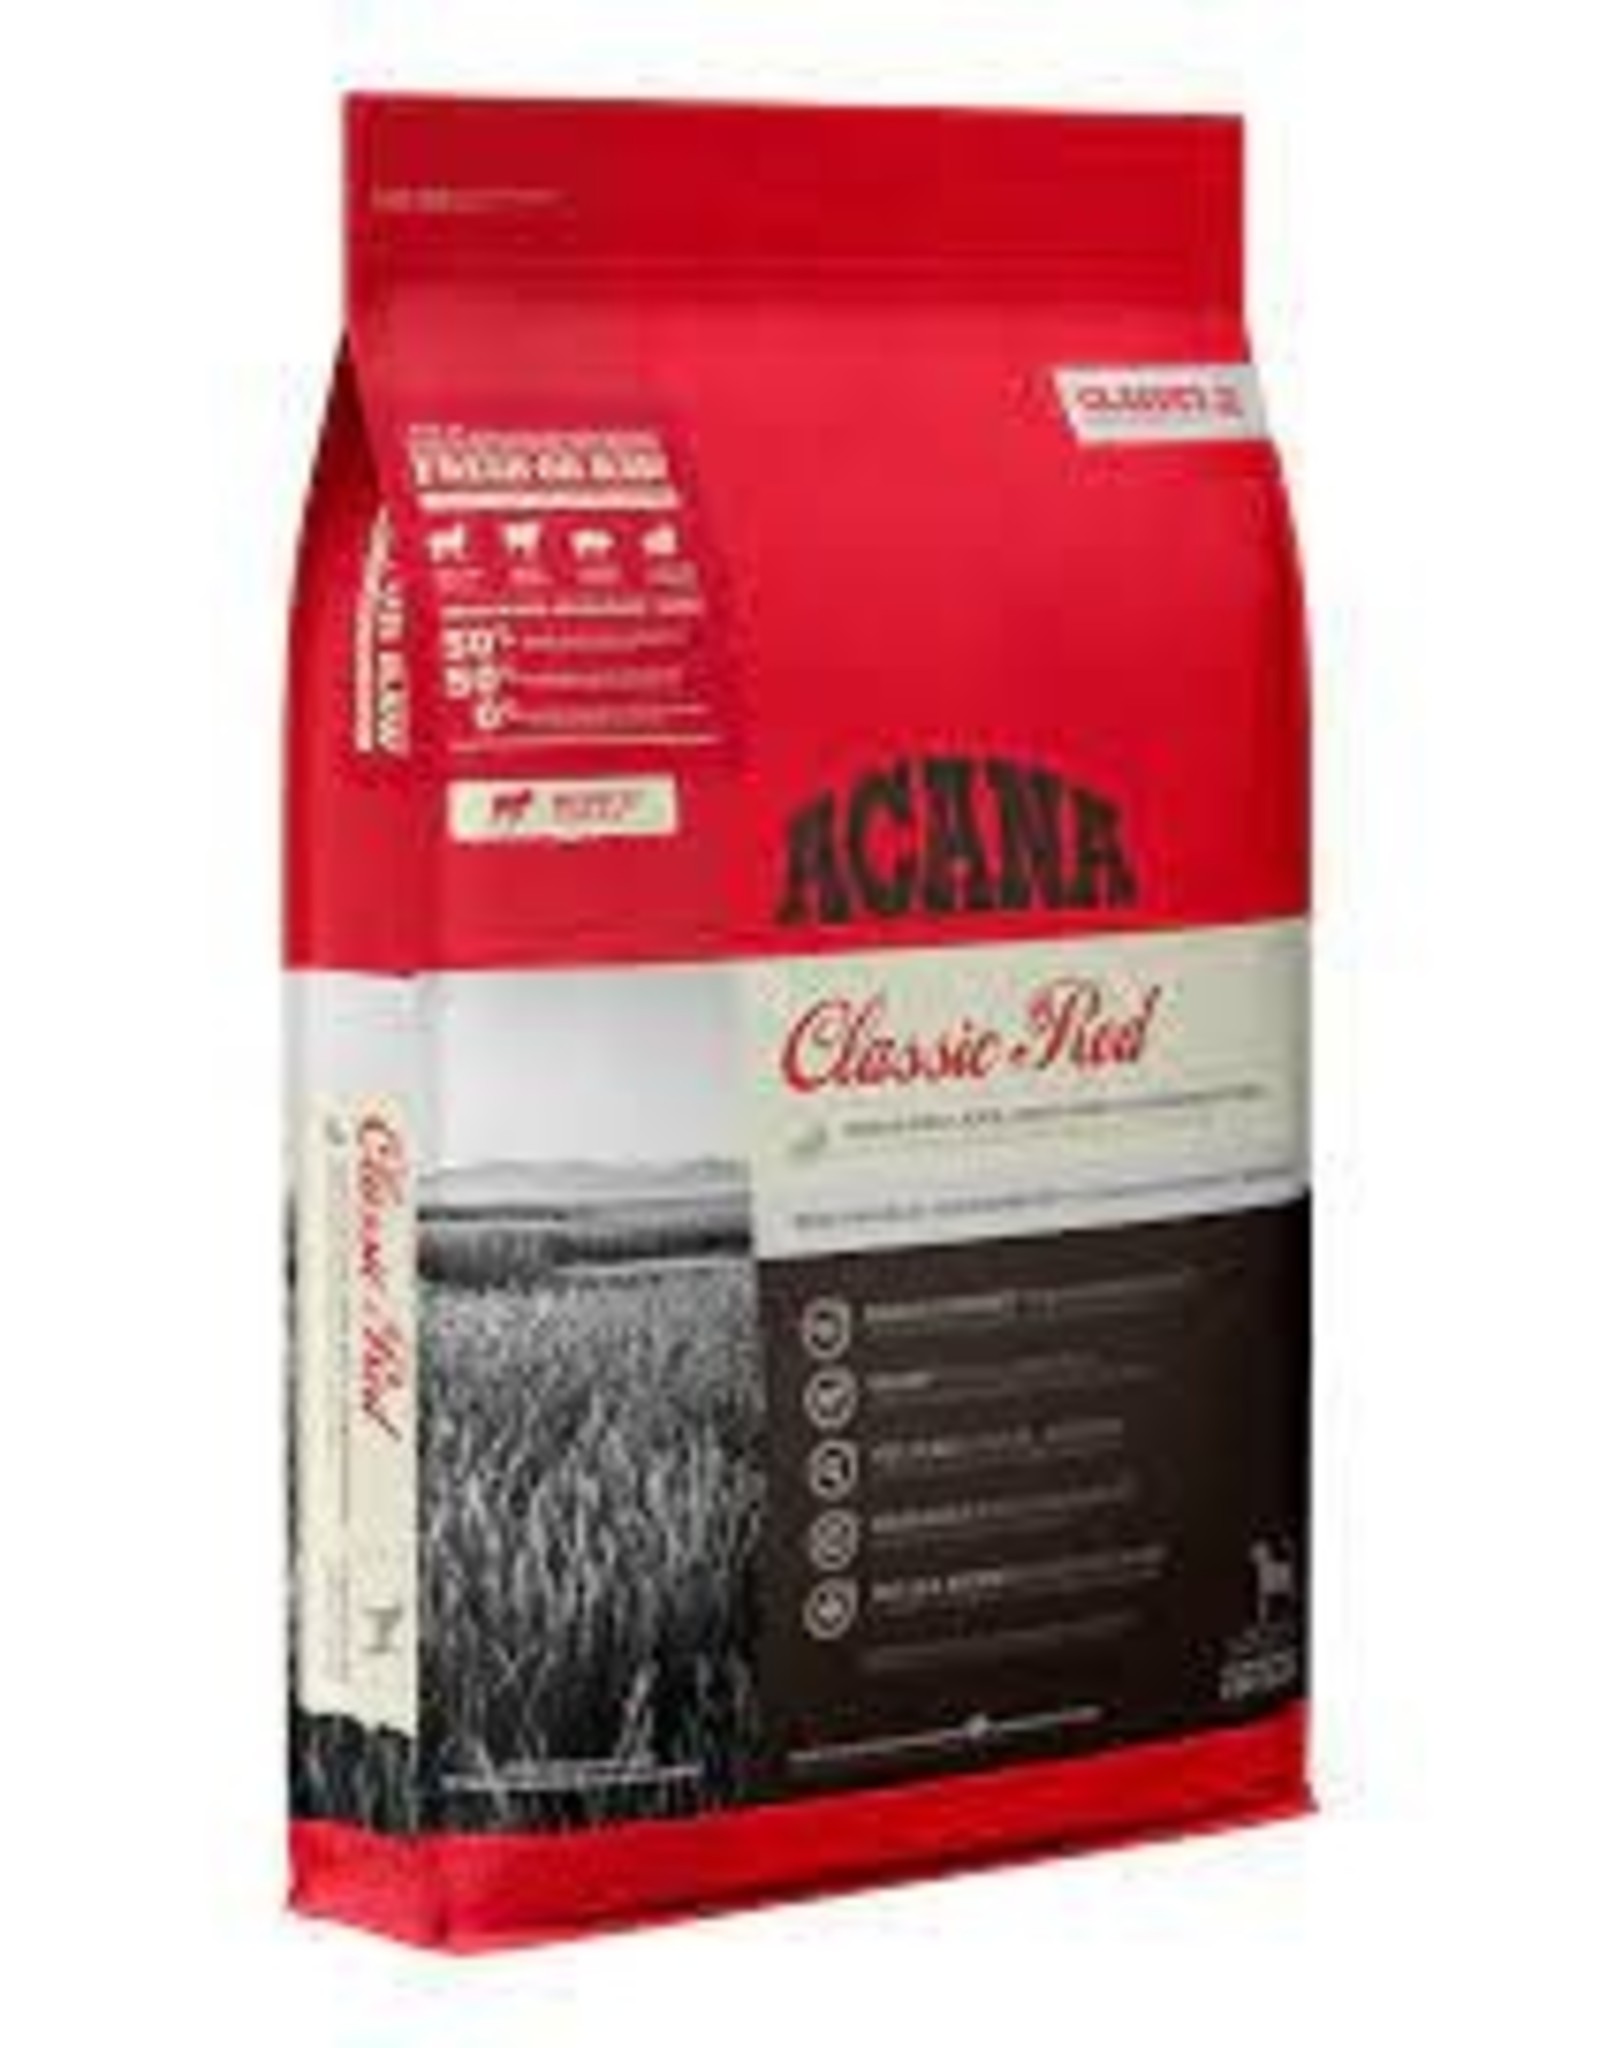 ACANA*  Classic Red 11.4 kg D401-56212 ***Back Ordered****